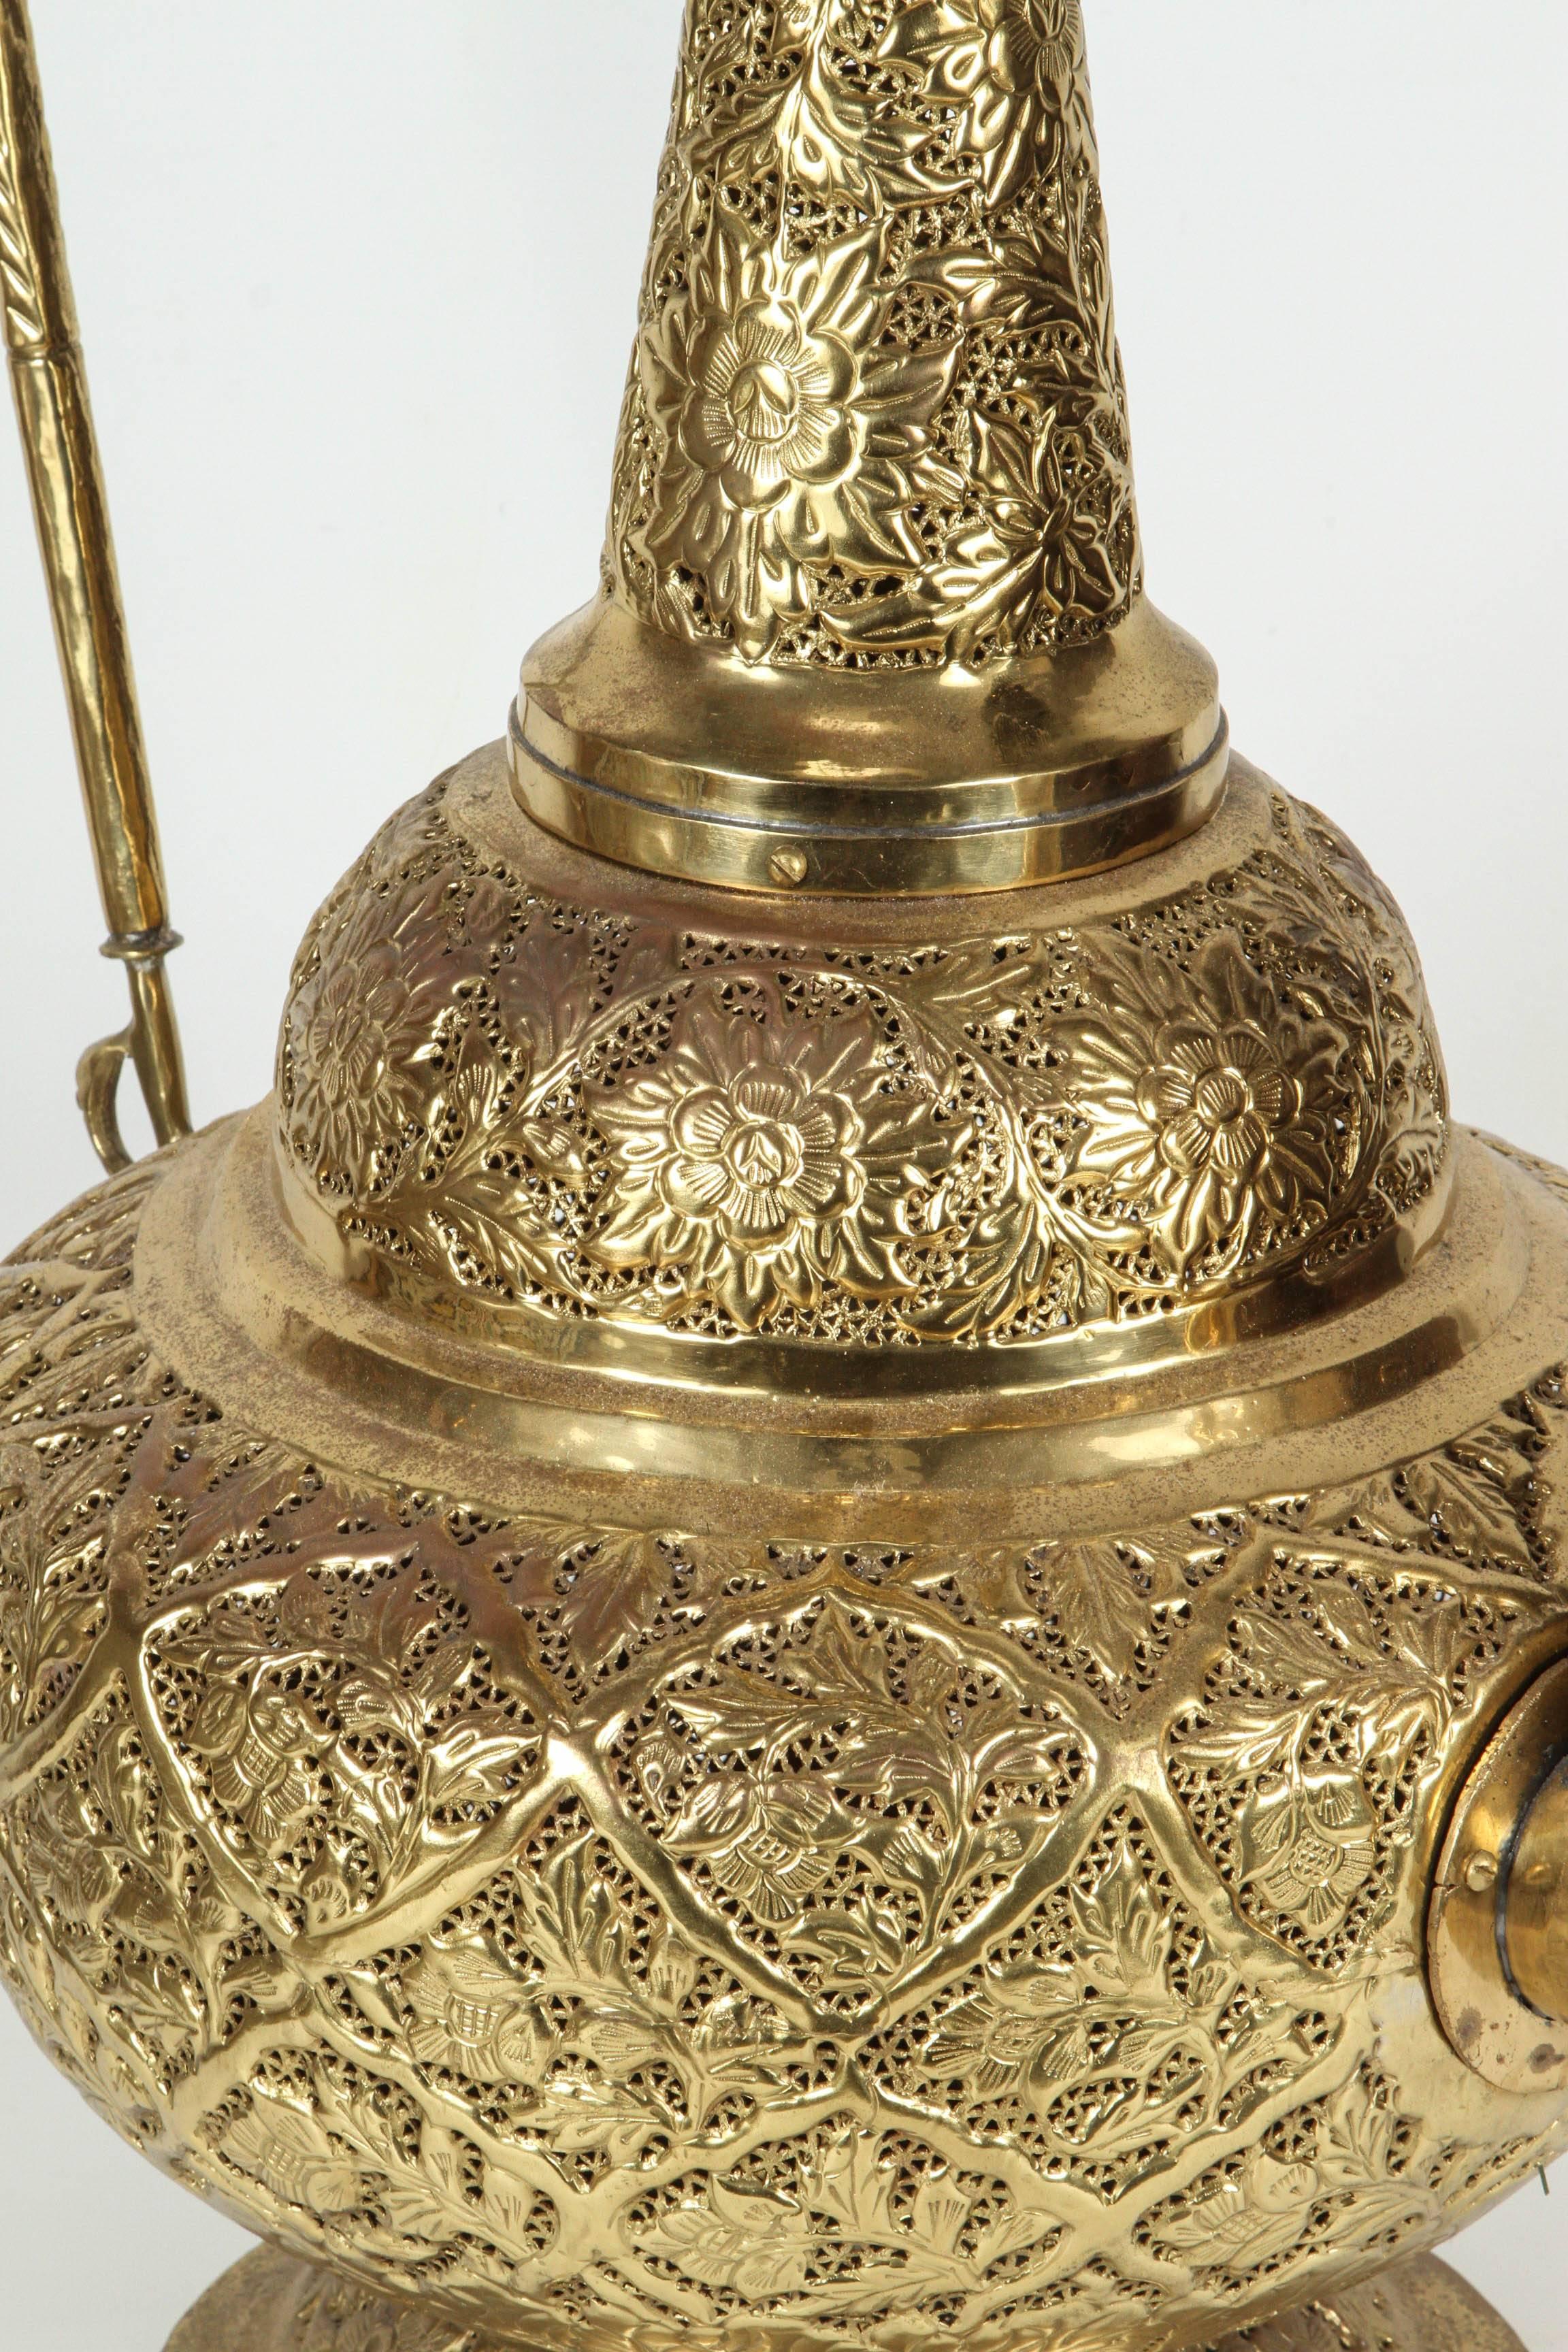 Hand-Crafted Oversized Tall Moorish Brass Middle Eastern Ewer Lamp